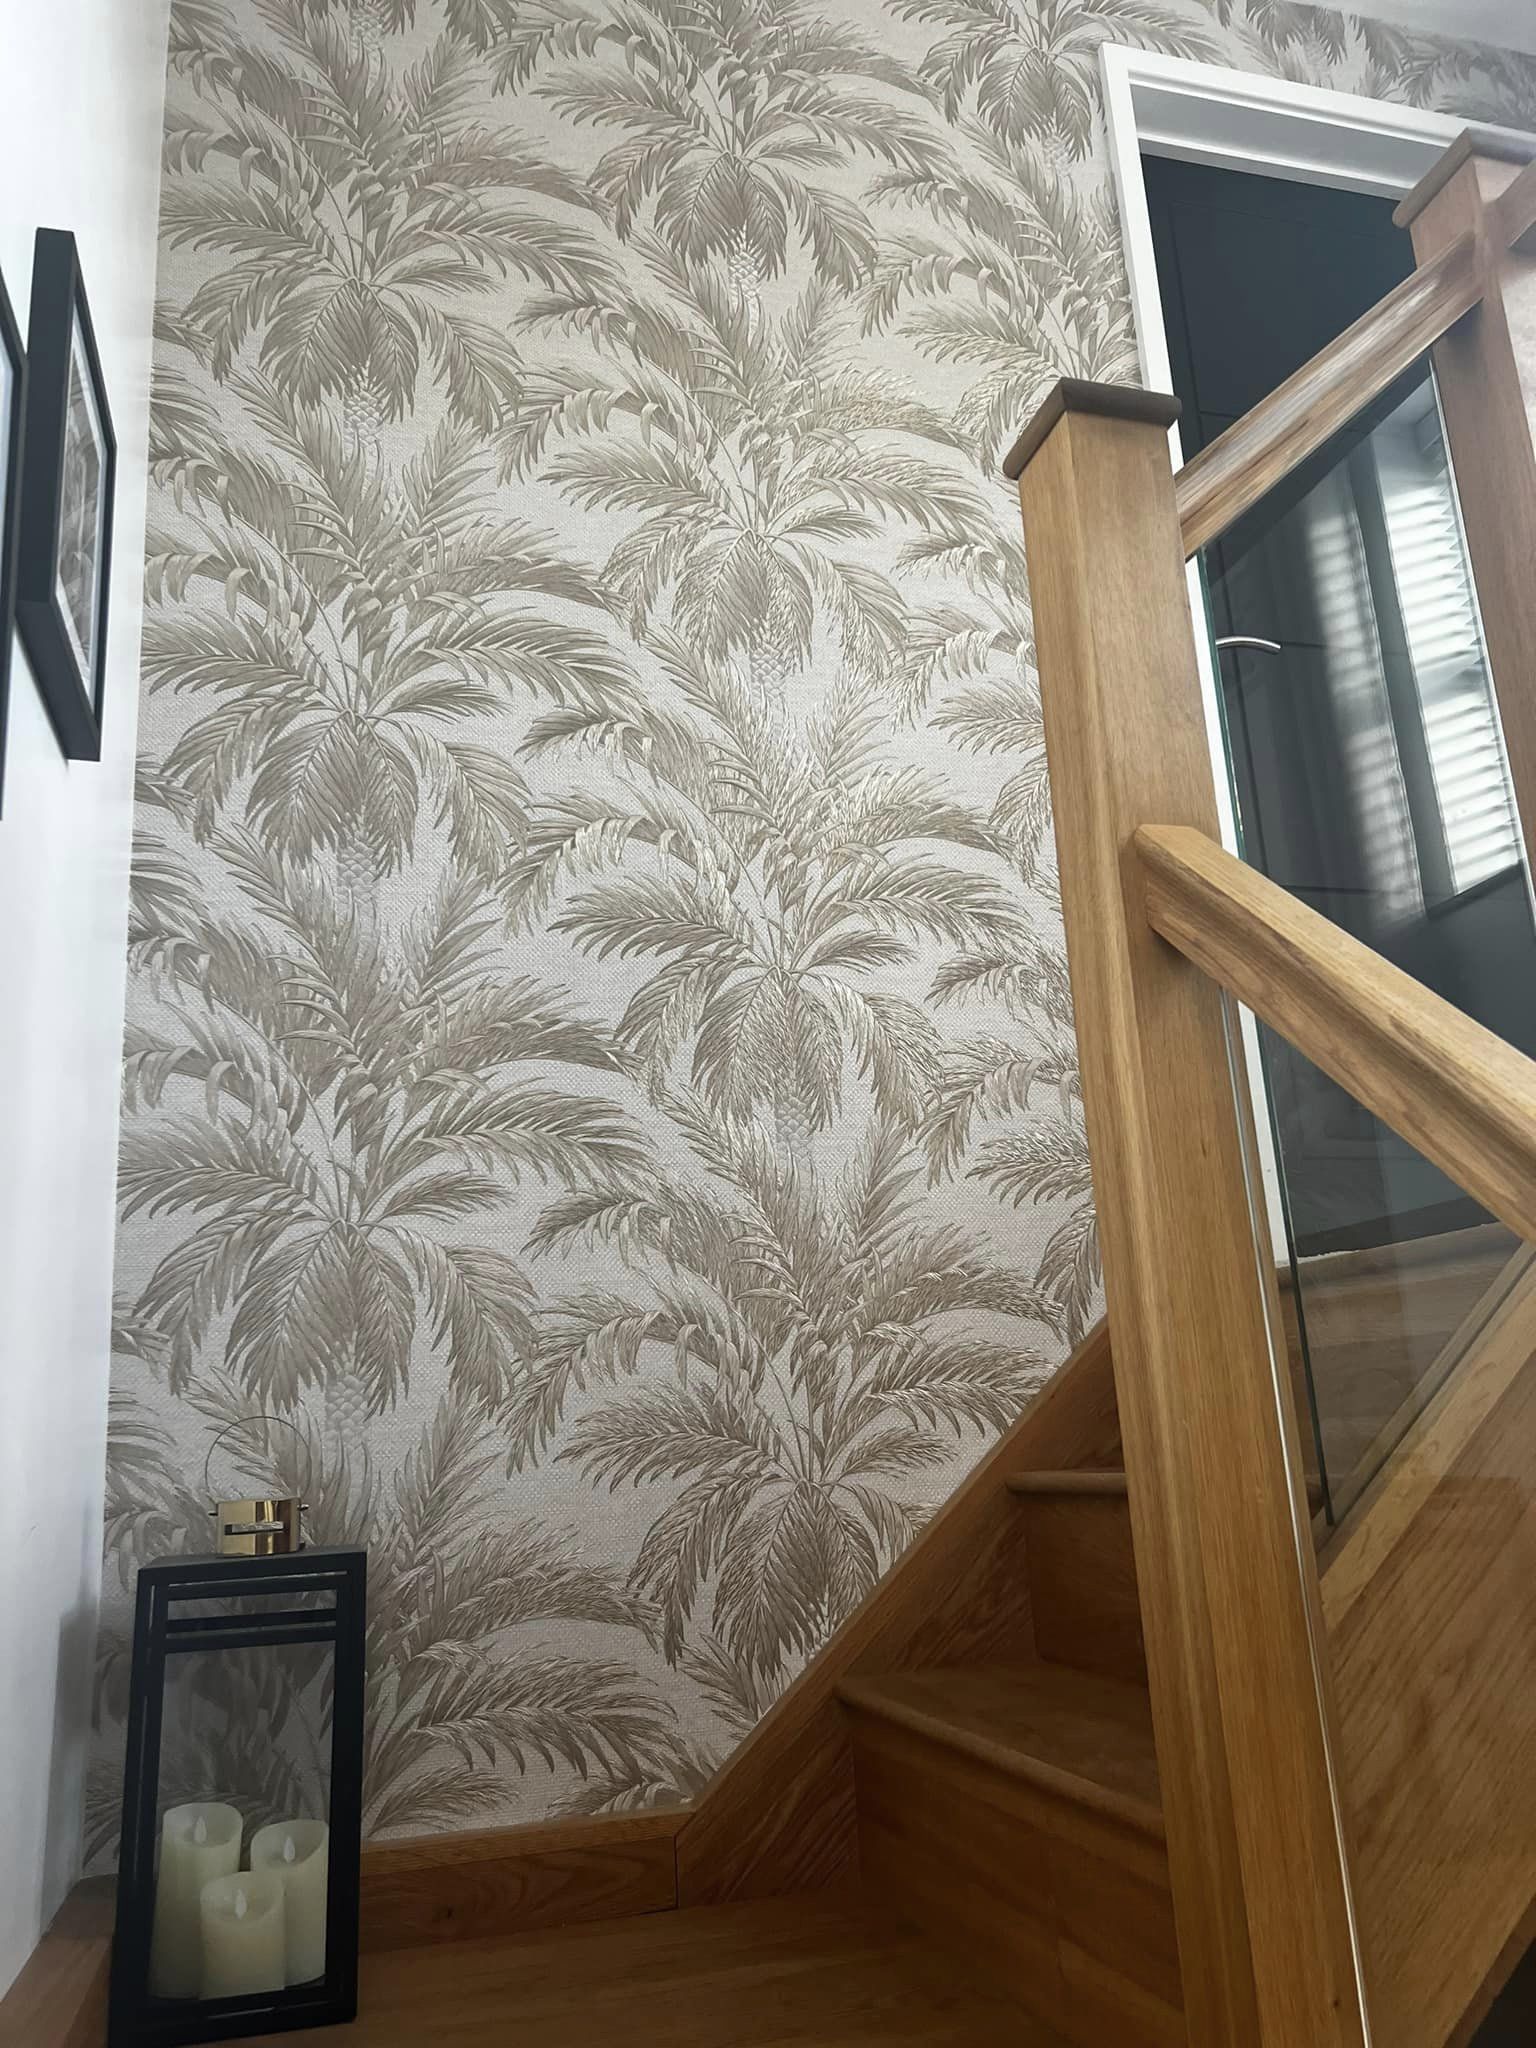 Wallpaper on stairs